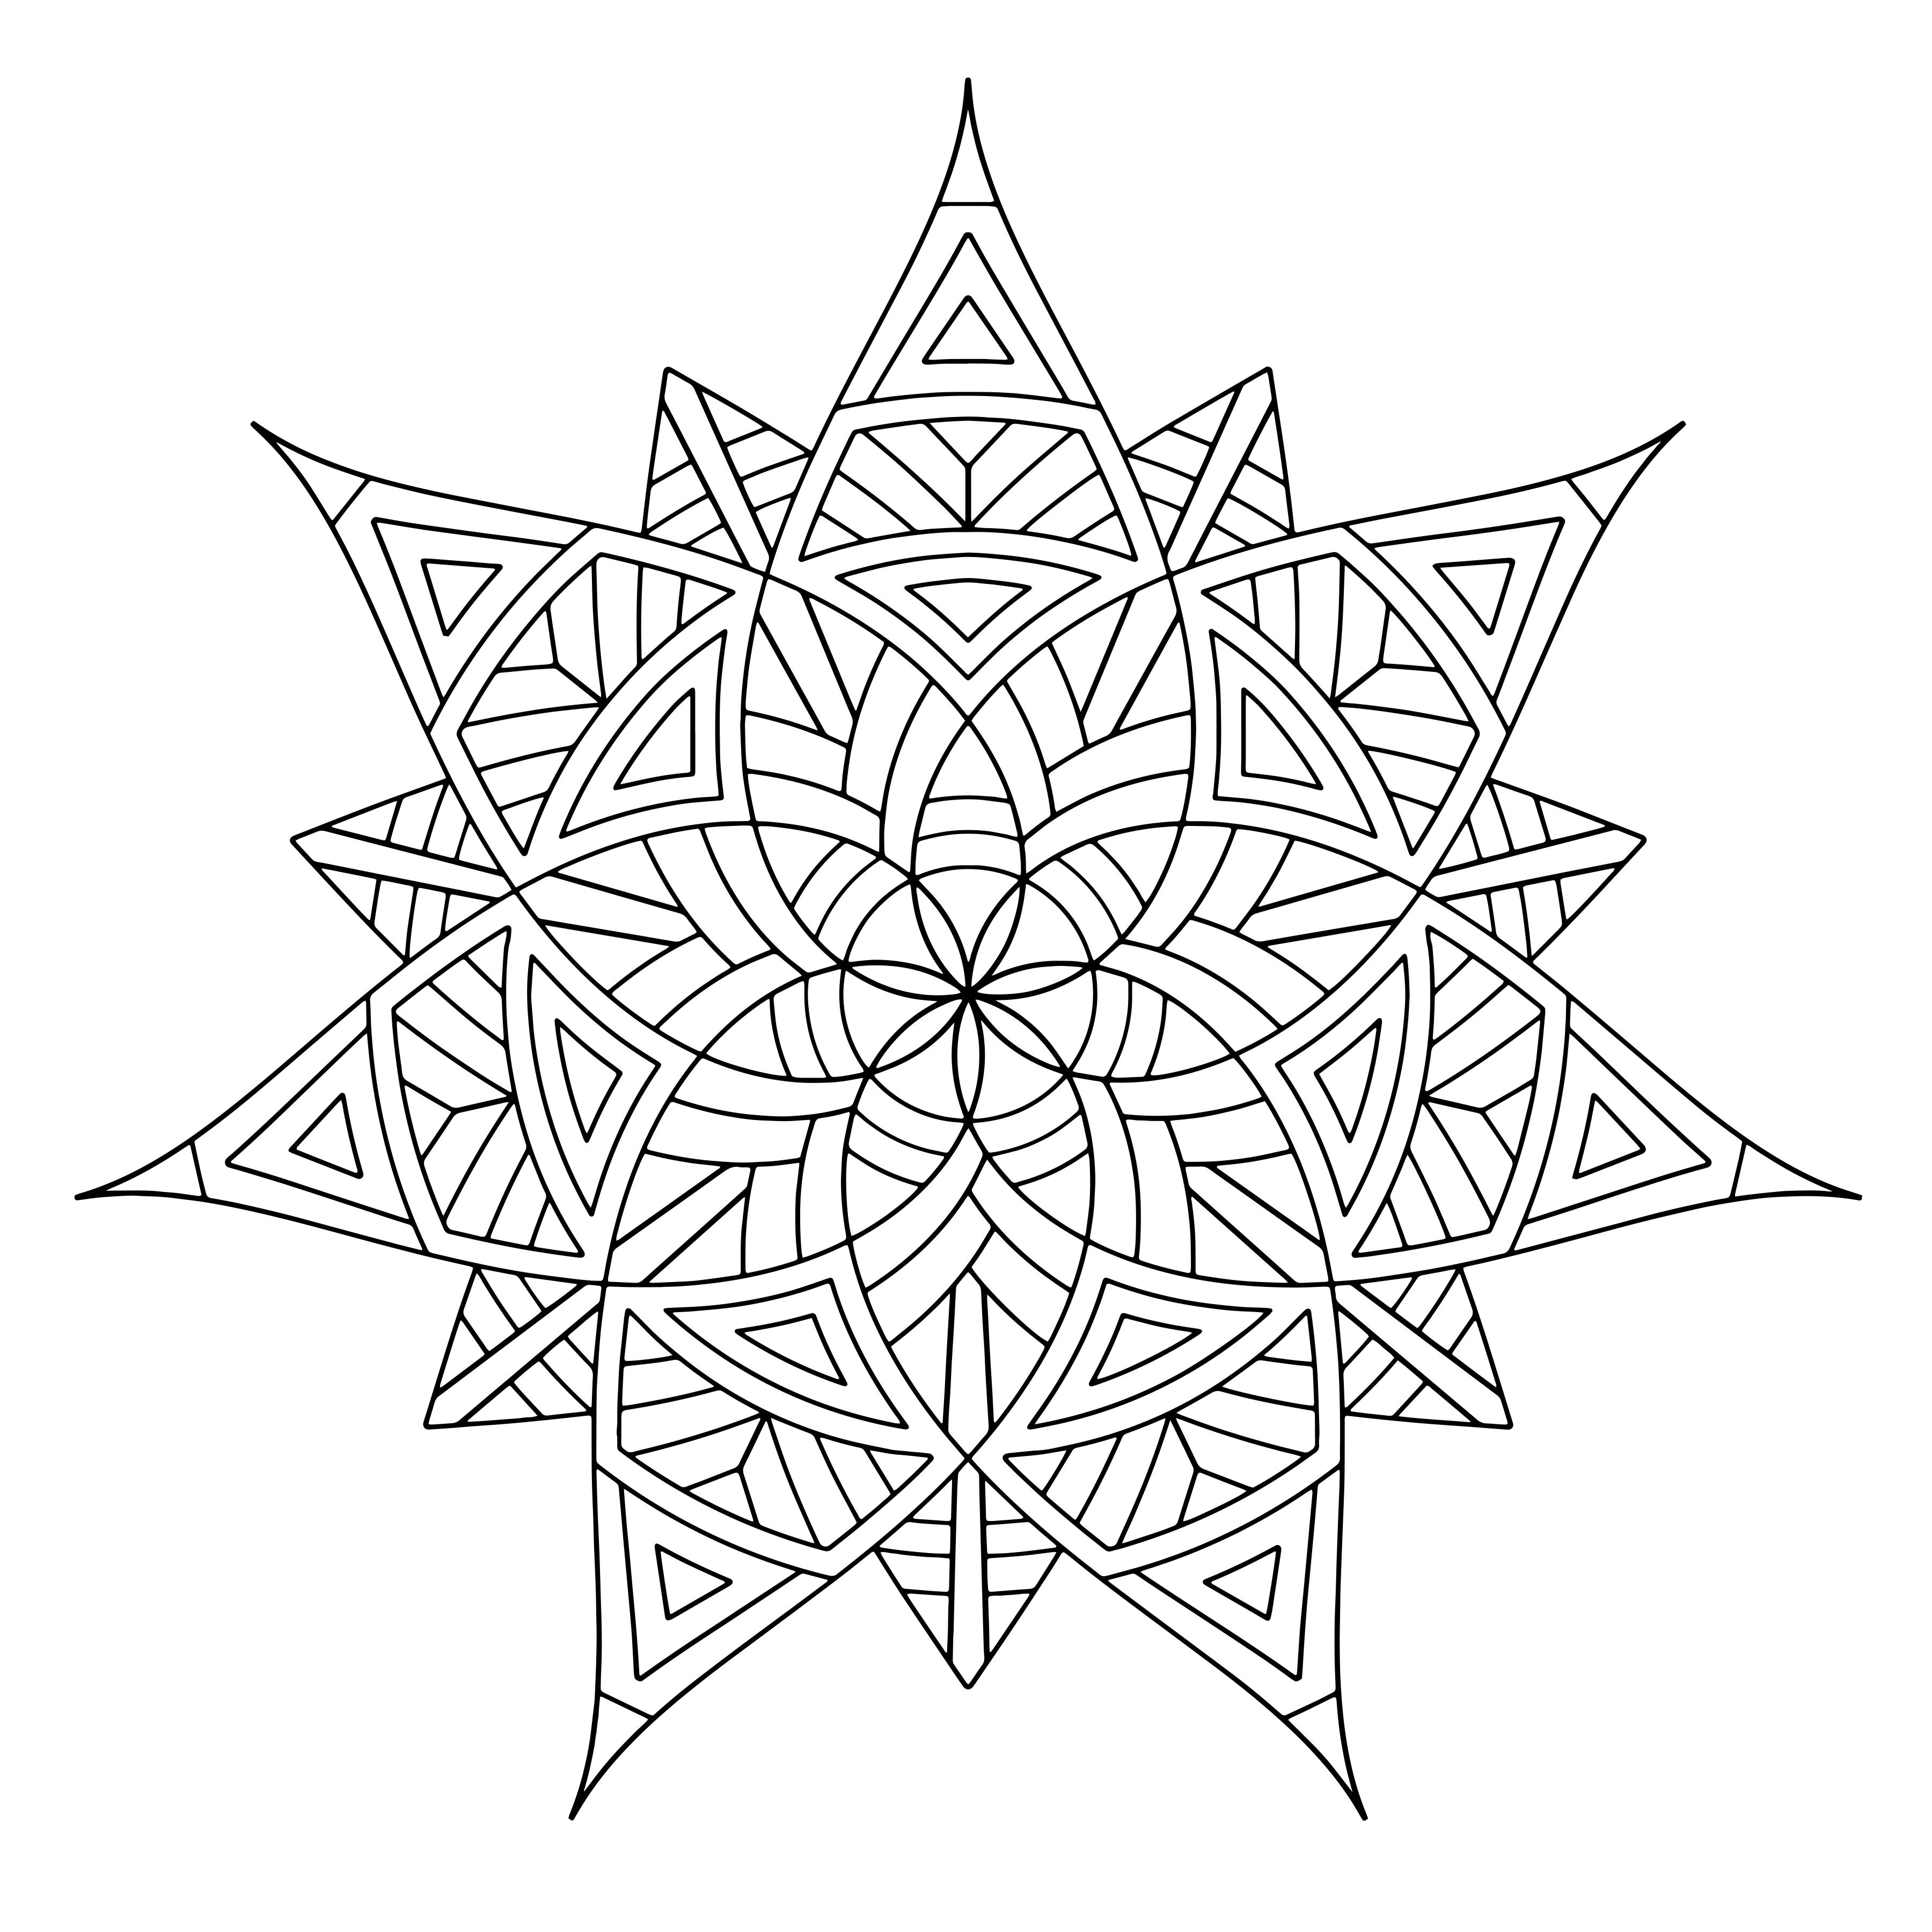 Free Printable Coloring Pages For Adults
 Free Printable Geometric Coloring Pages for Adults